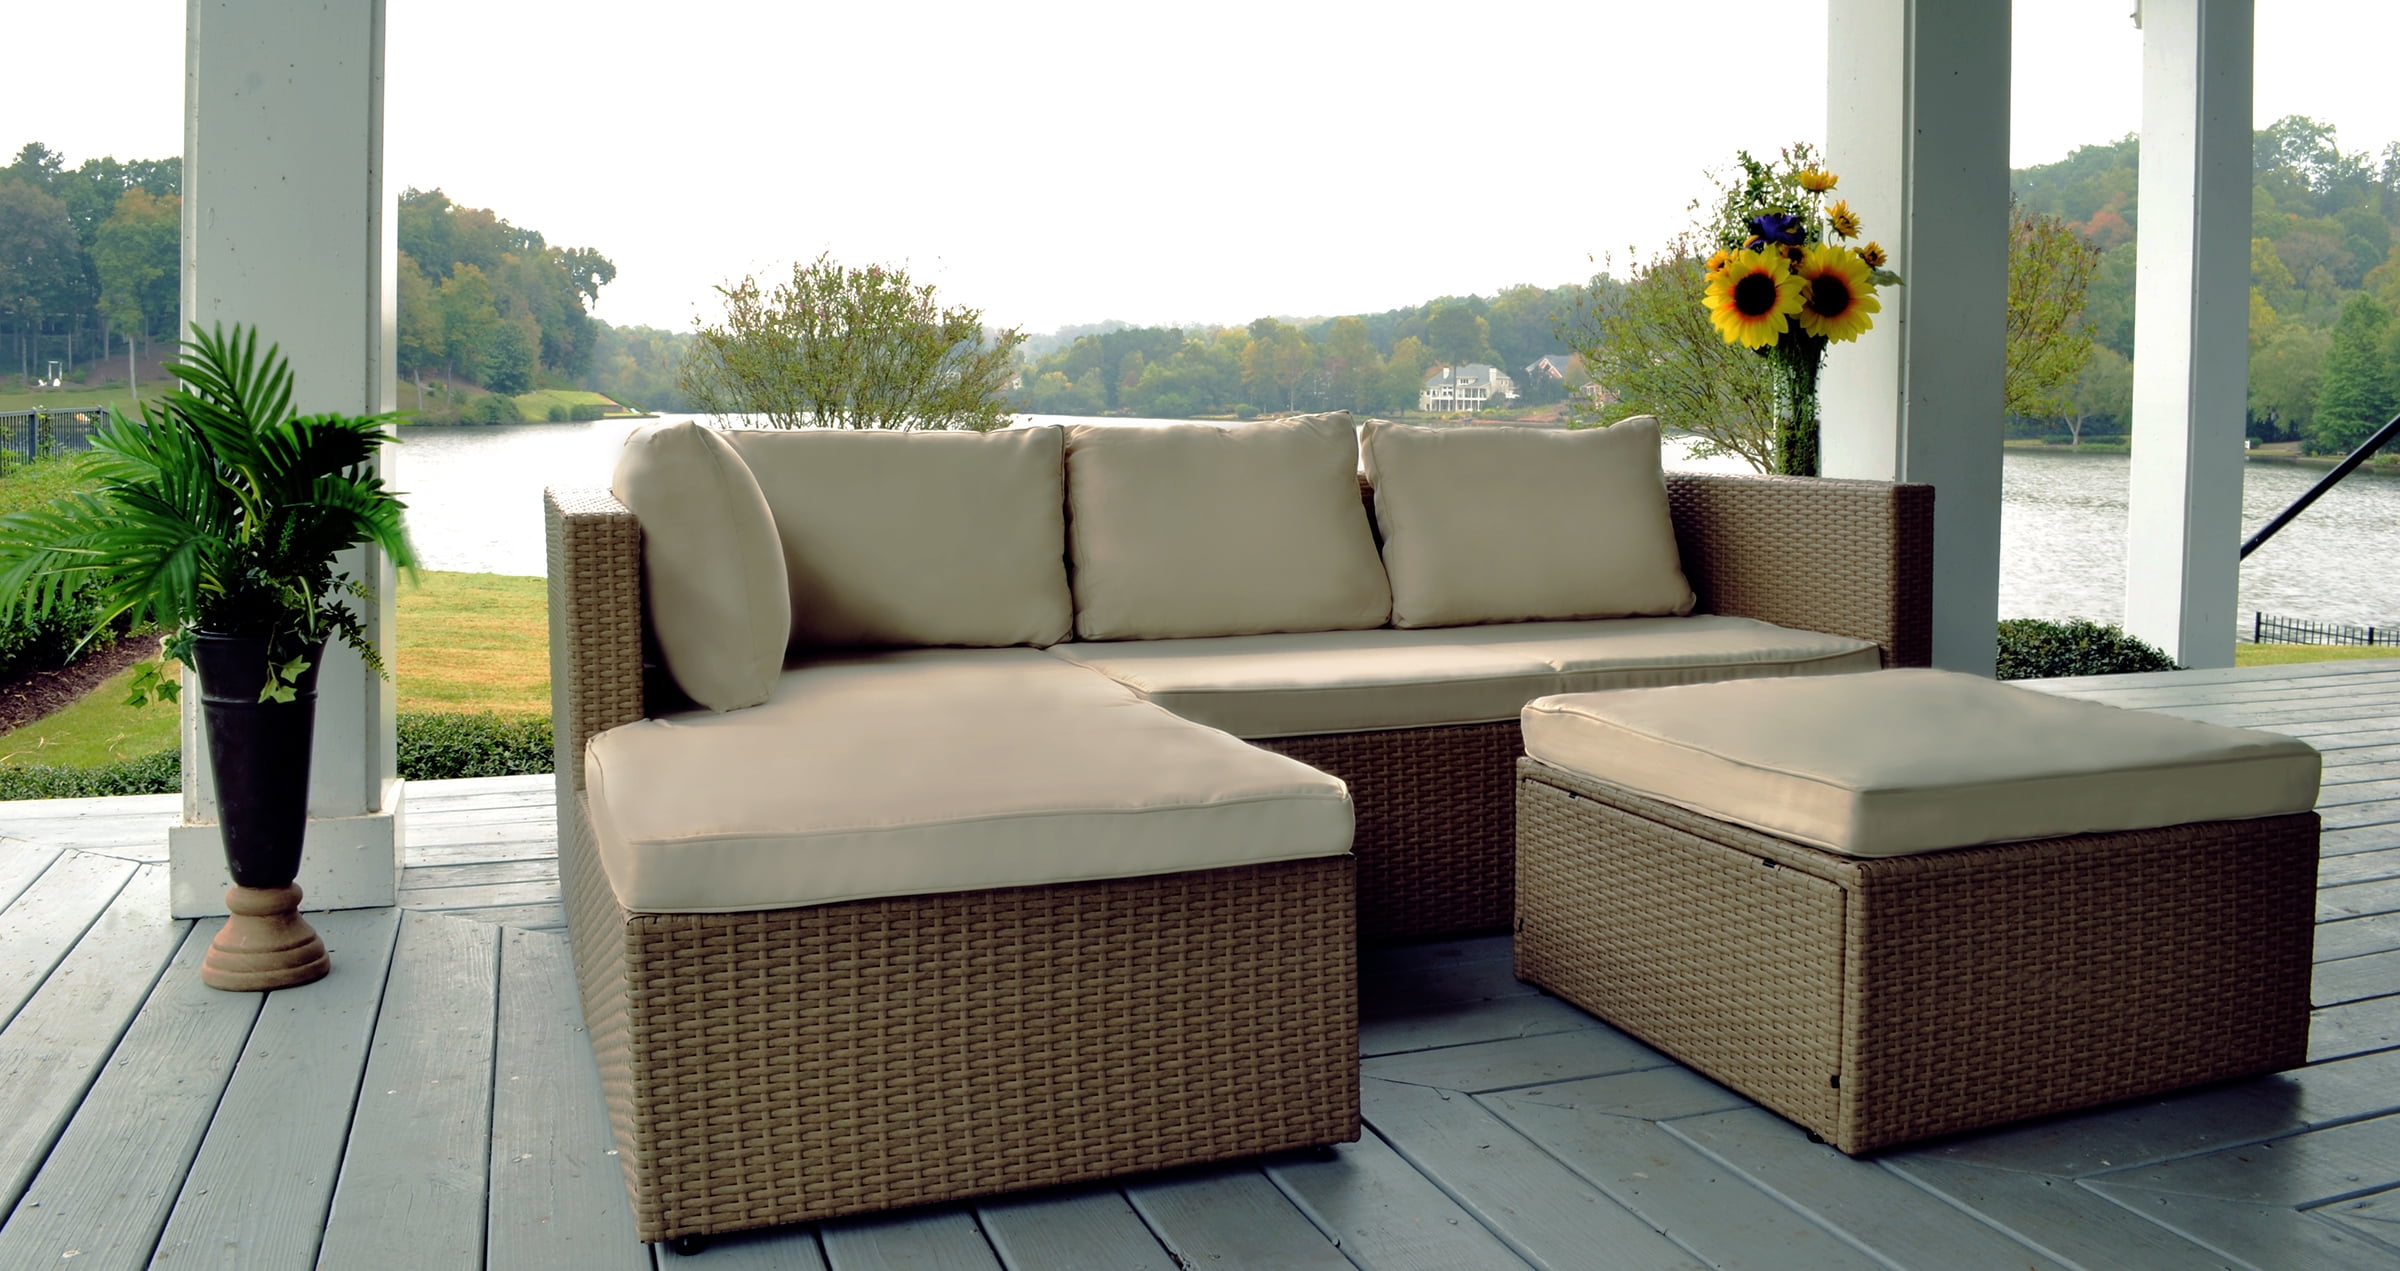 Katonah Outdoor Sectional Set with Vanilla Latte Colored Fabric and Sandstone Wicker